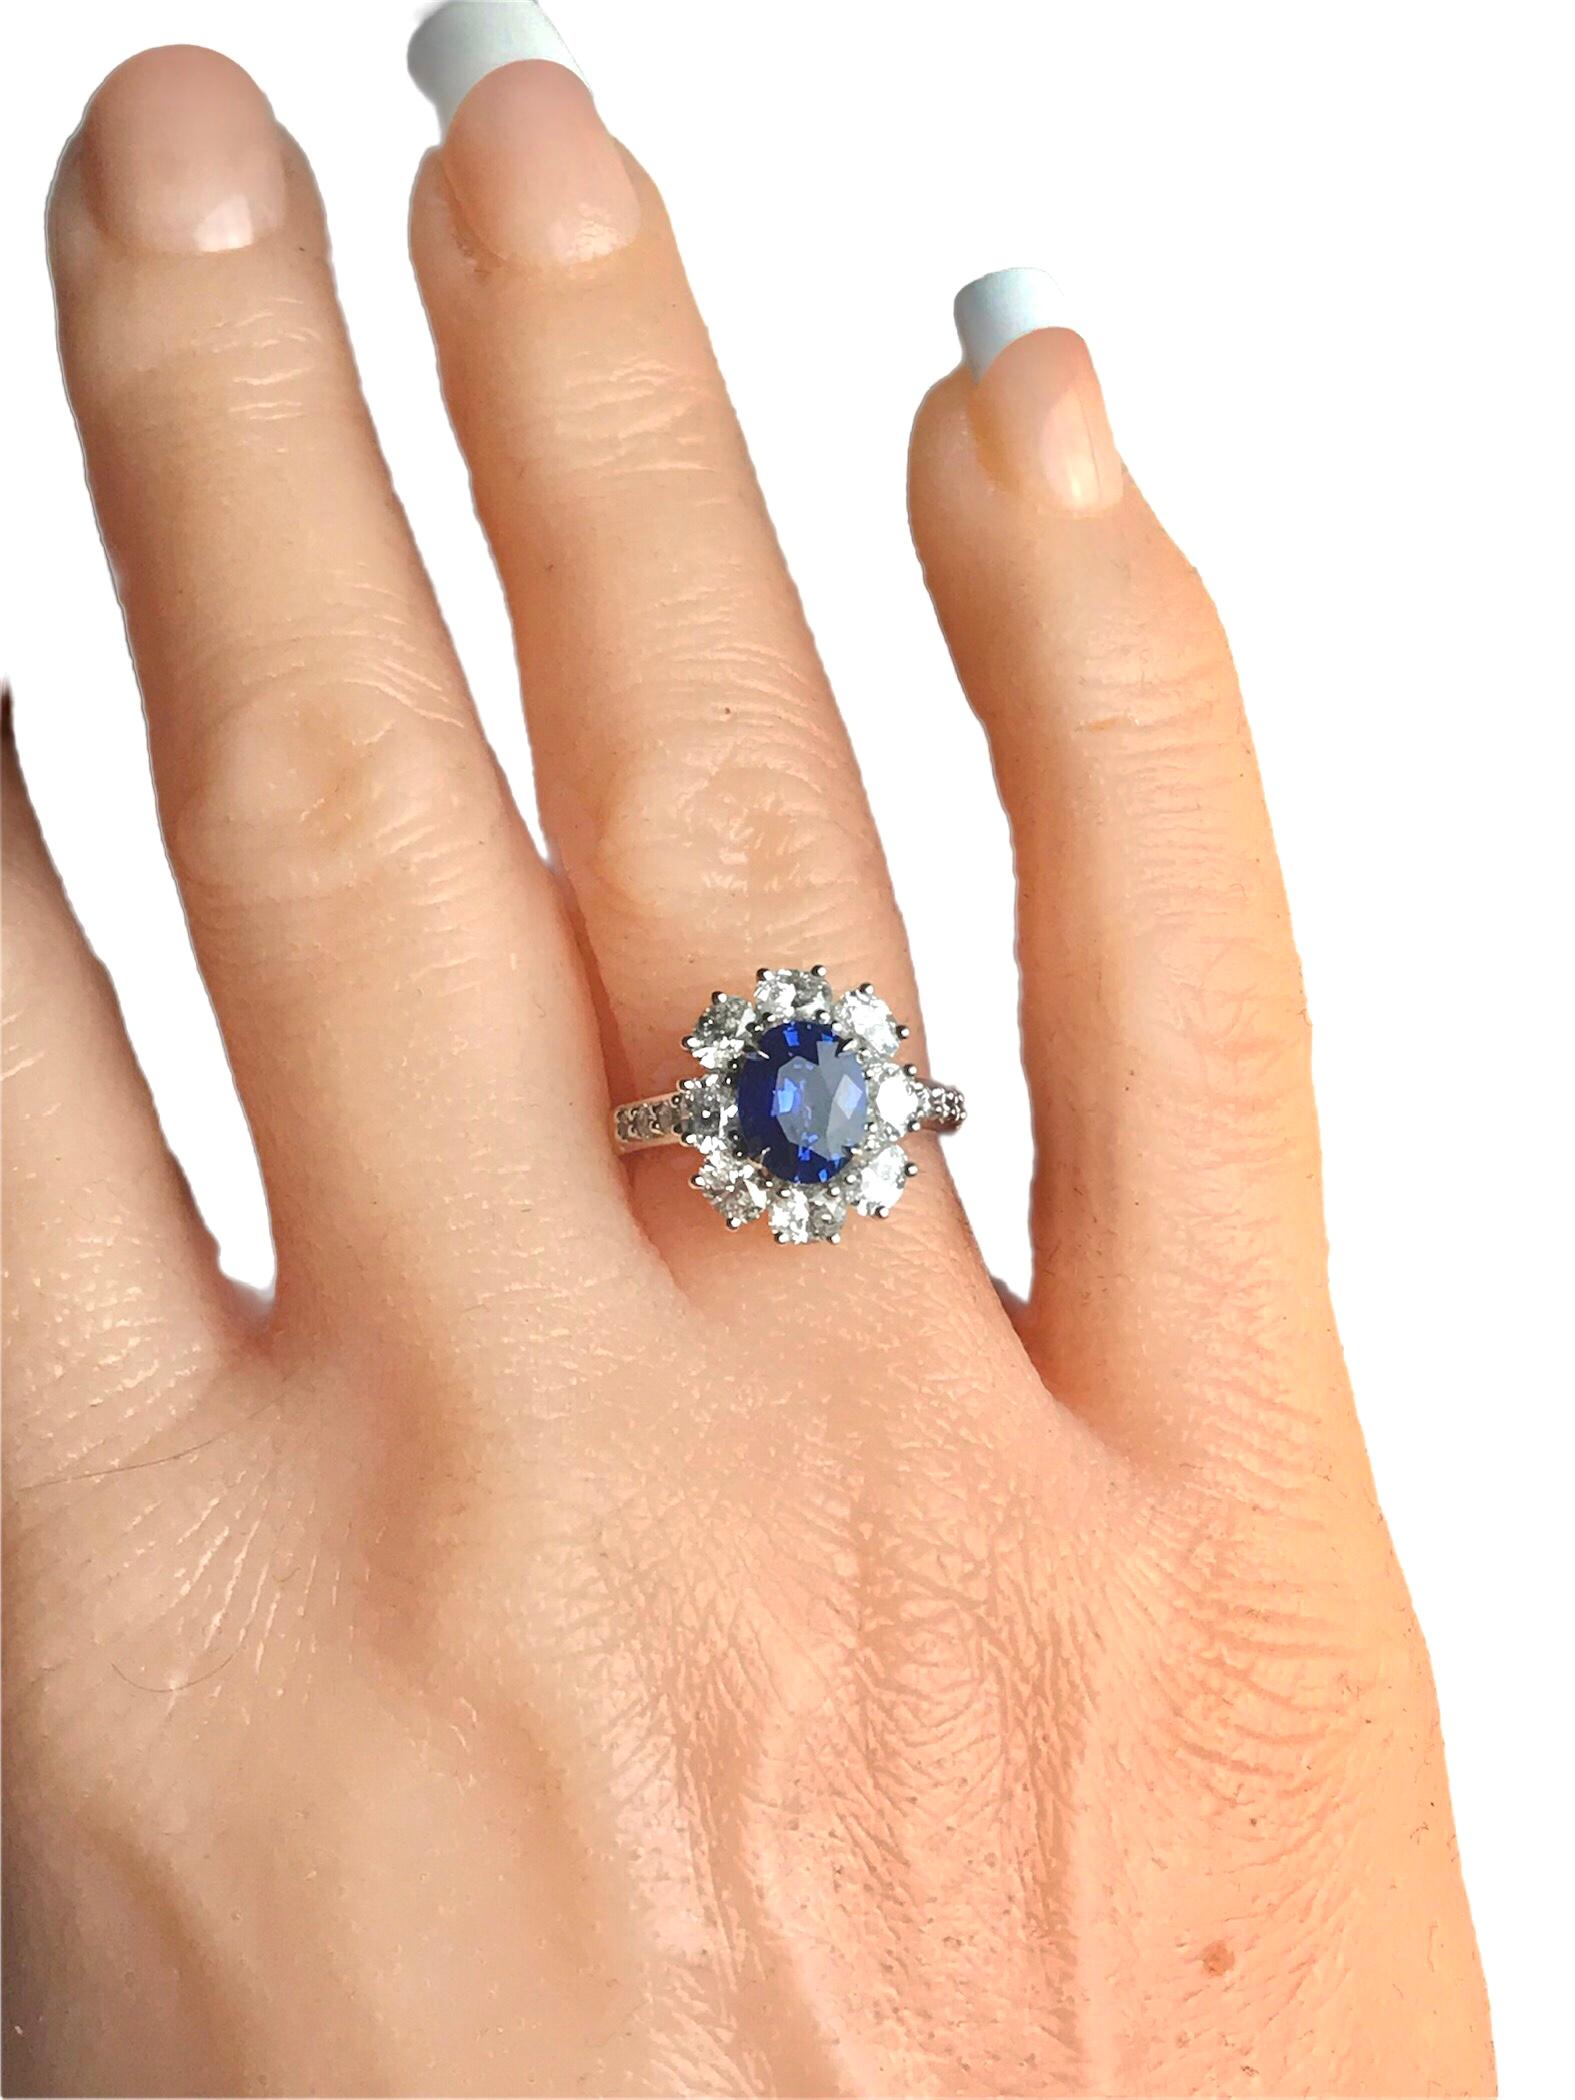 1.89 Ct Oval Cut Ceylon Sapphire Ring with 1.53 Carat Diamond Halo in 18k ref334 In New Condition For Sale In New York, NY